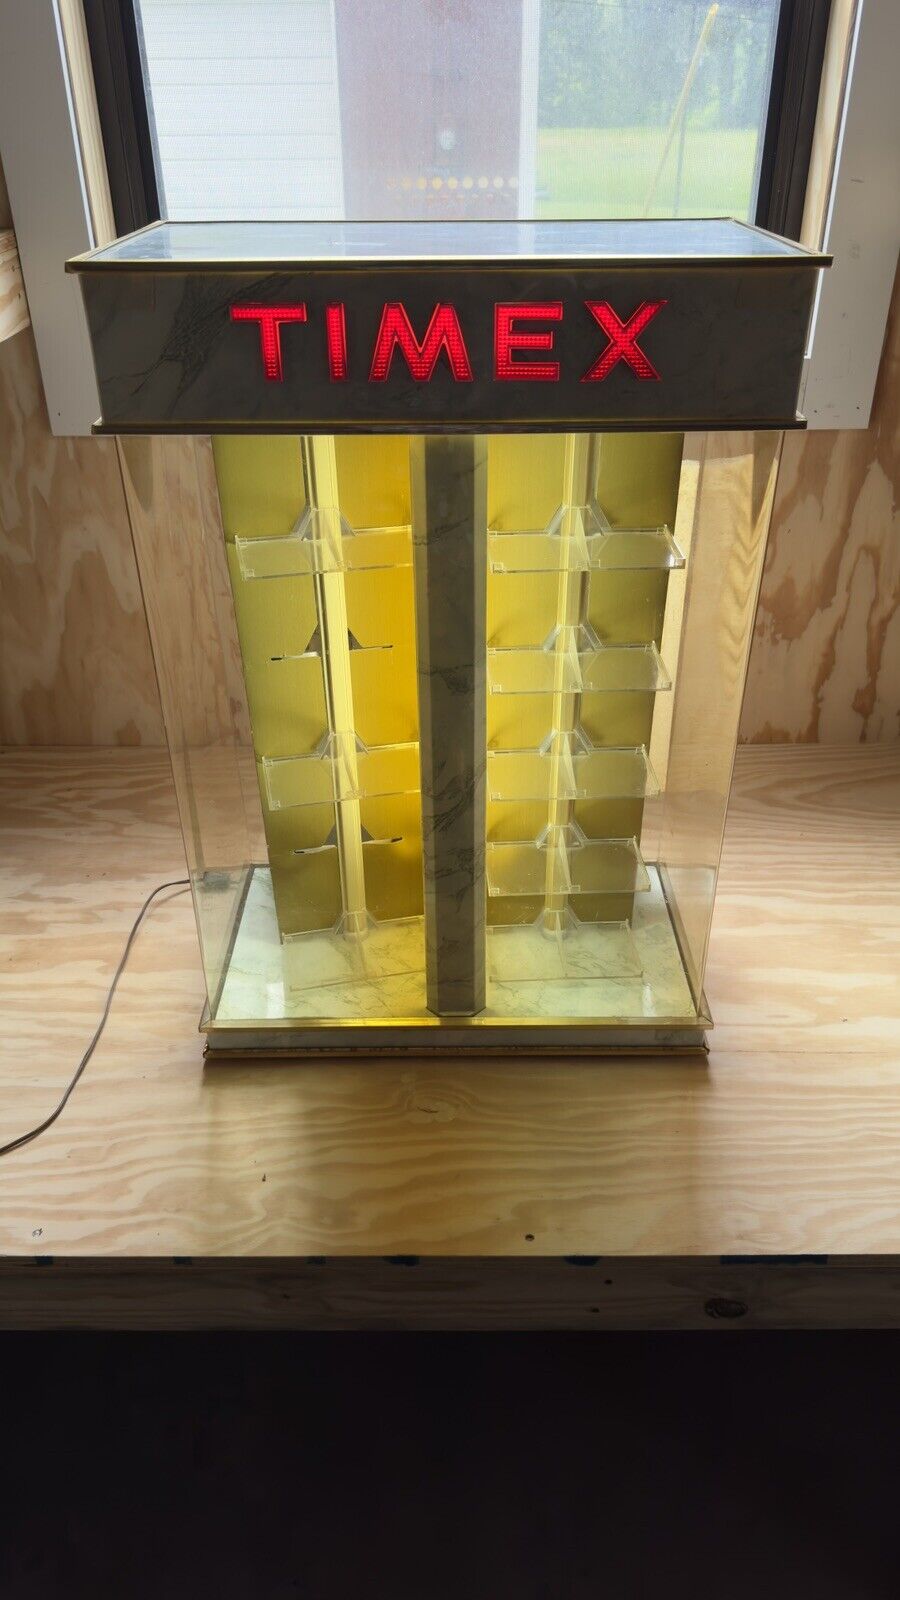 Rare Vintage Timex Electric Double shelf Rotating Lit Up 70s Watch Display Case.